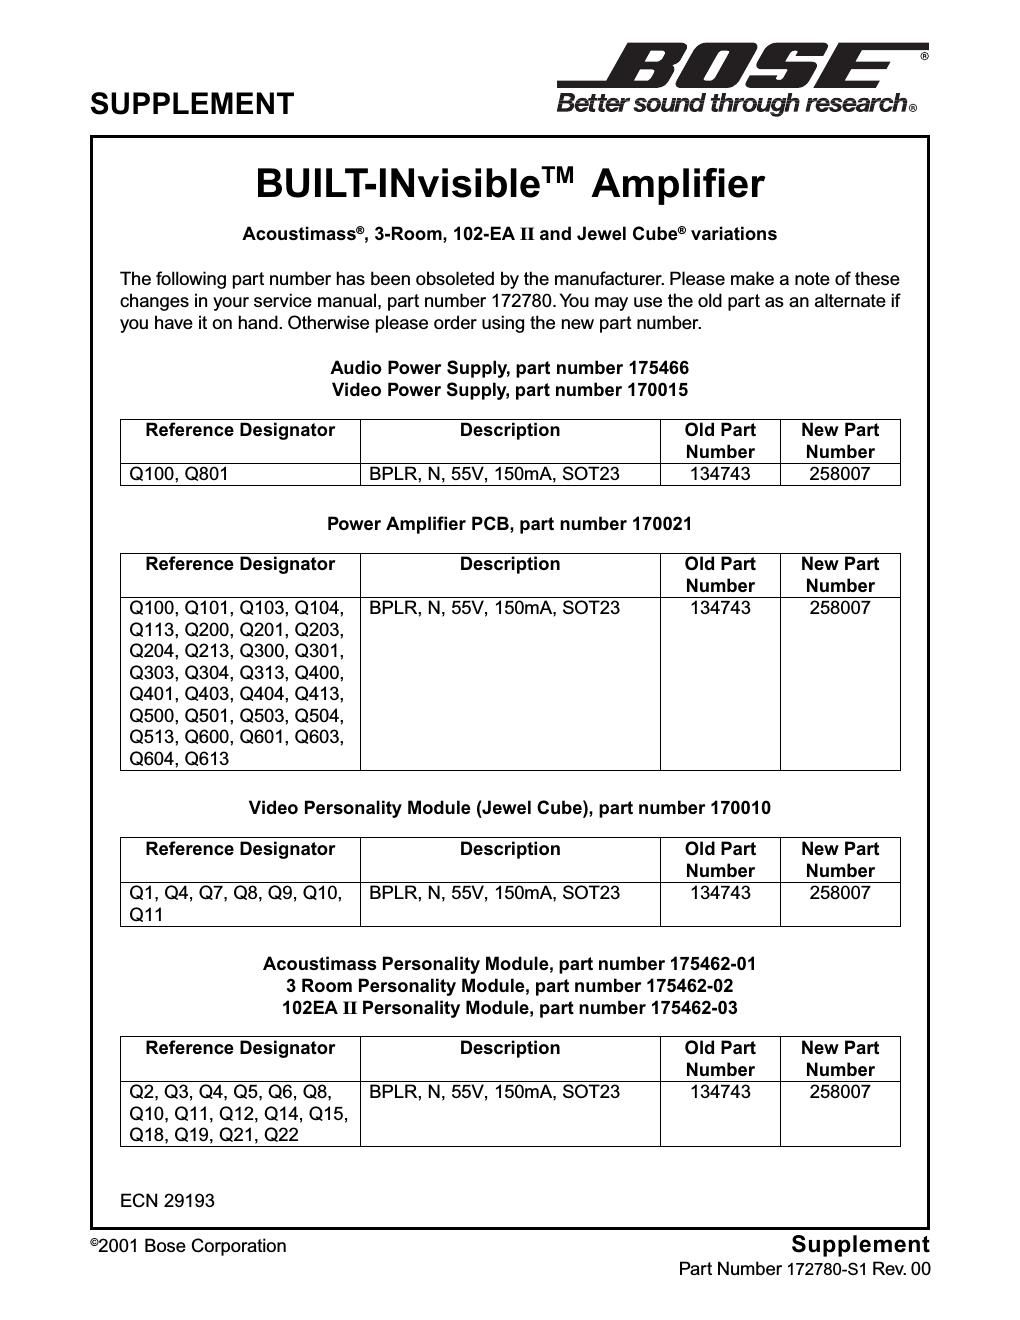 Free Audio - download bose built invisible amplifier service manual s1